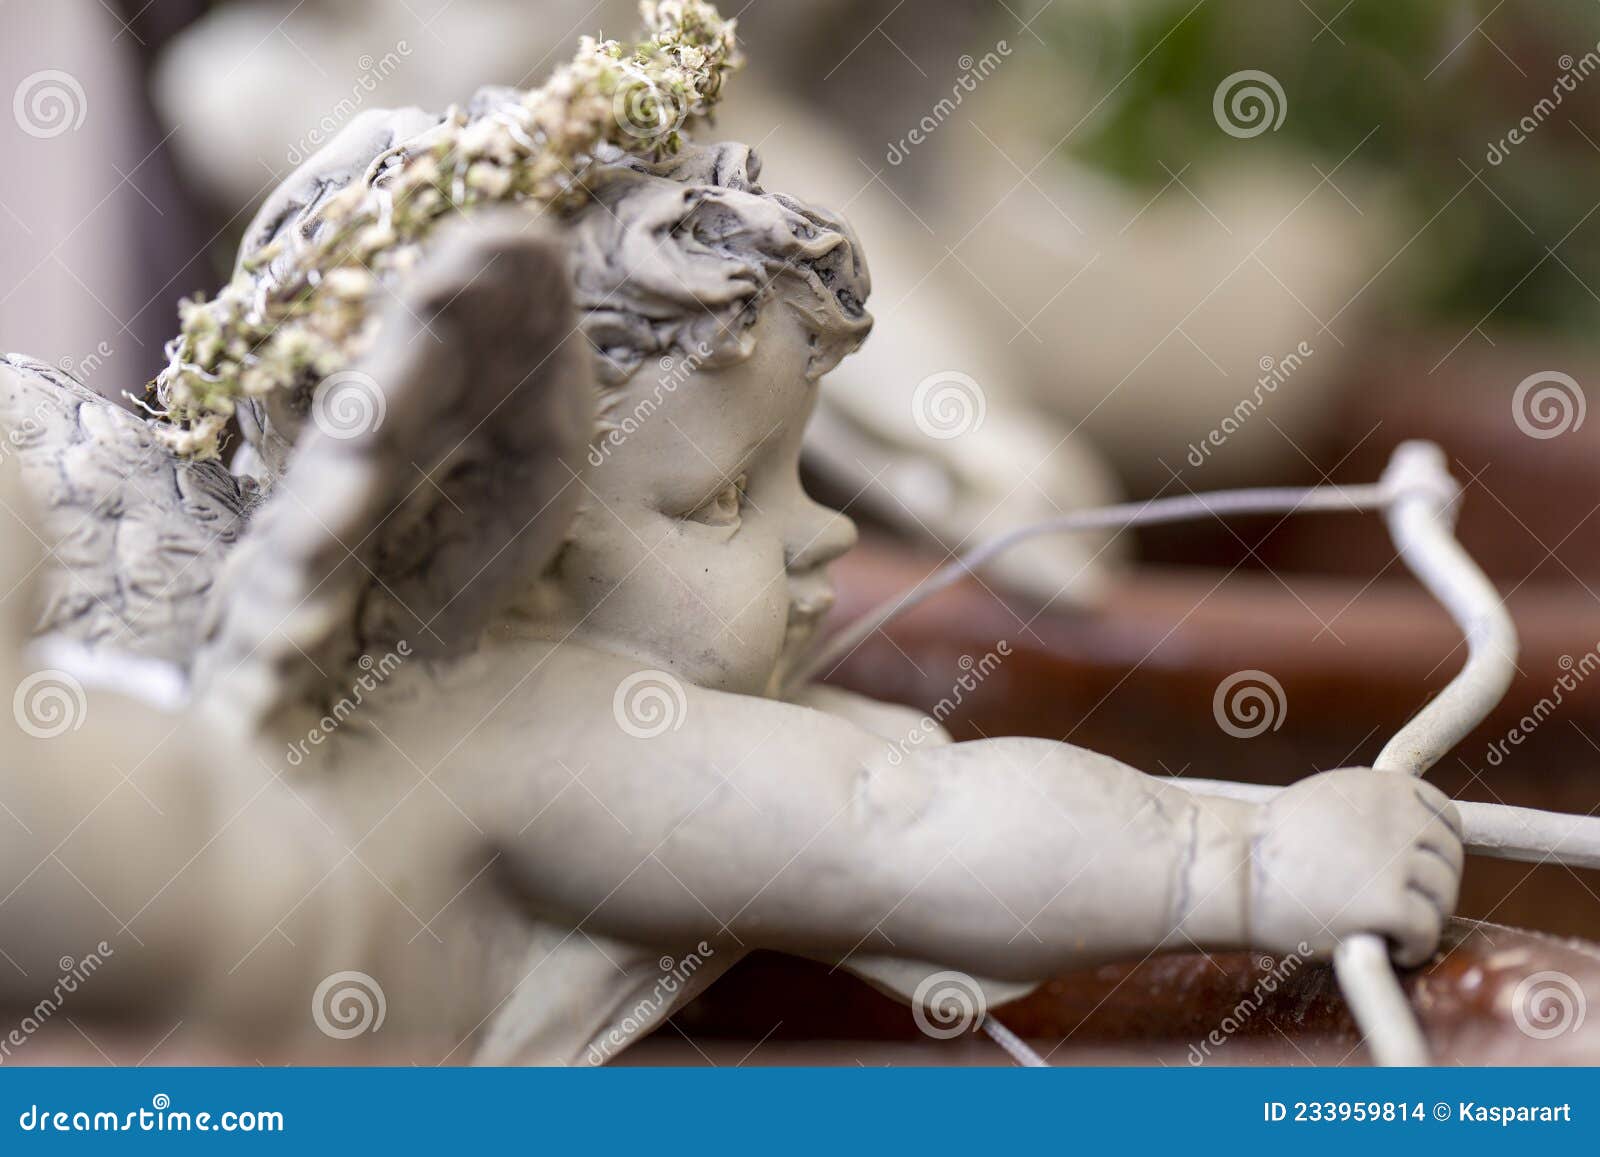 figurine of amor aiming with bow and arrow